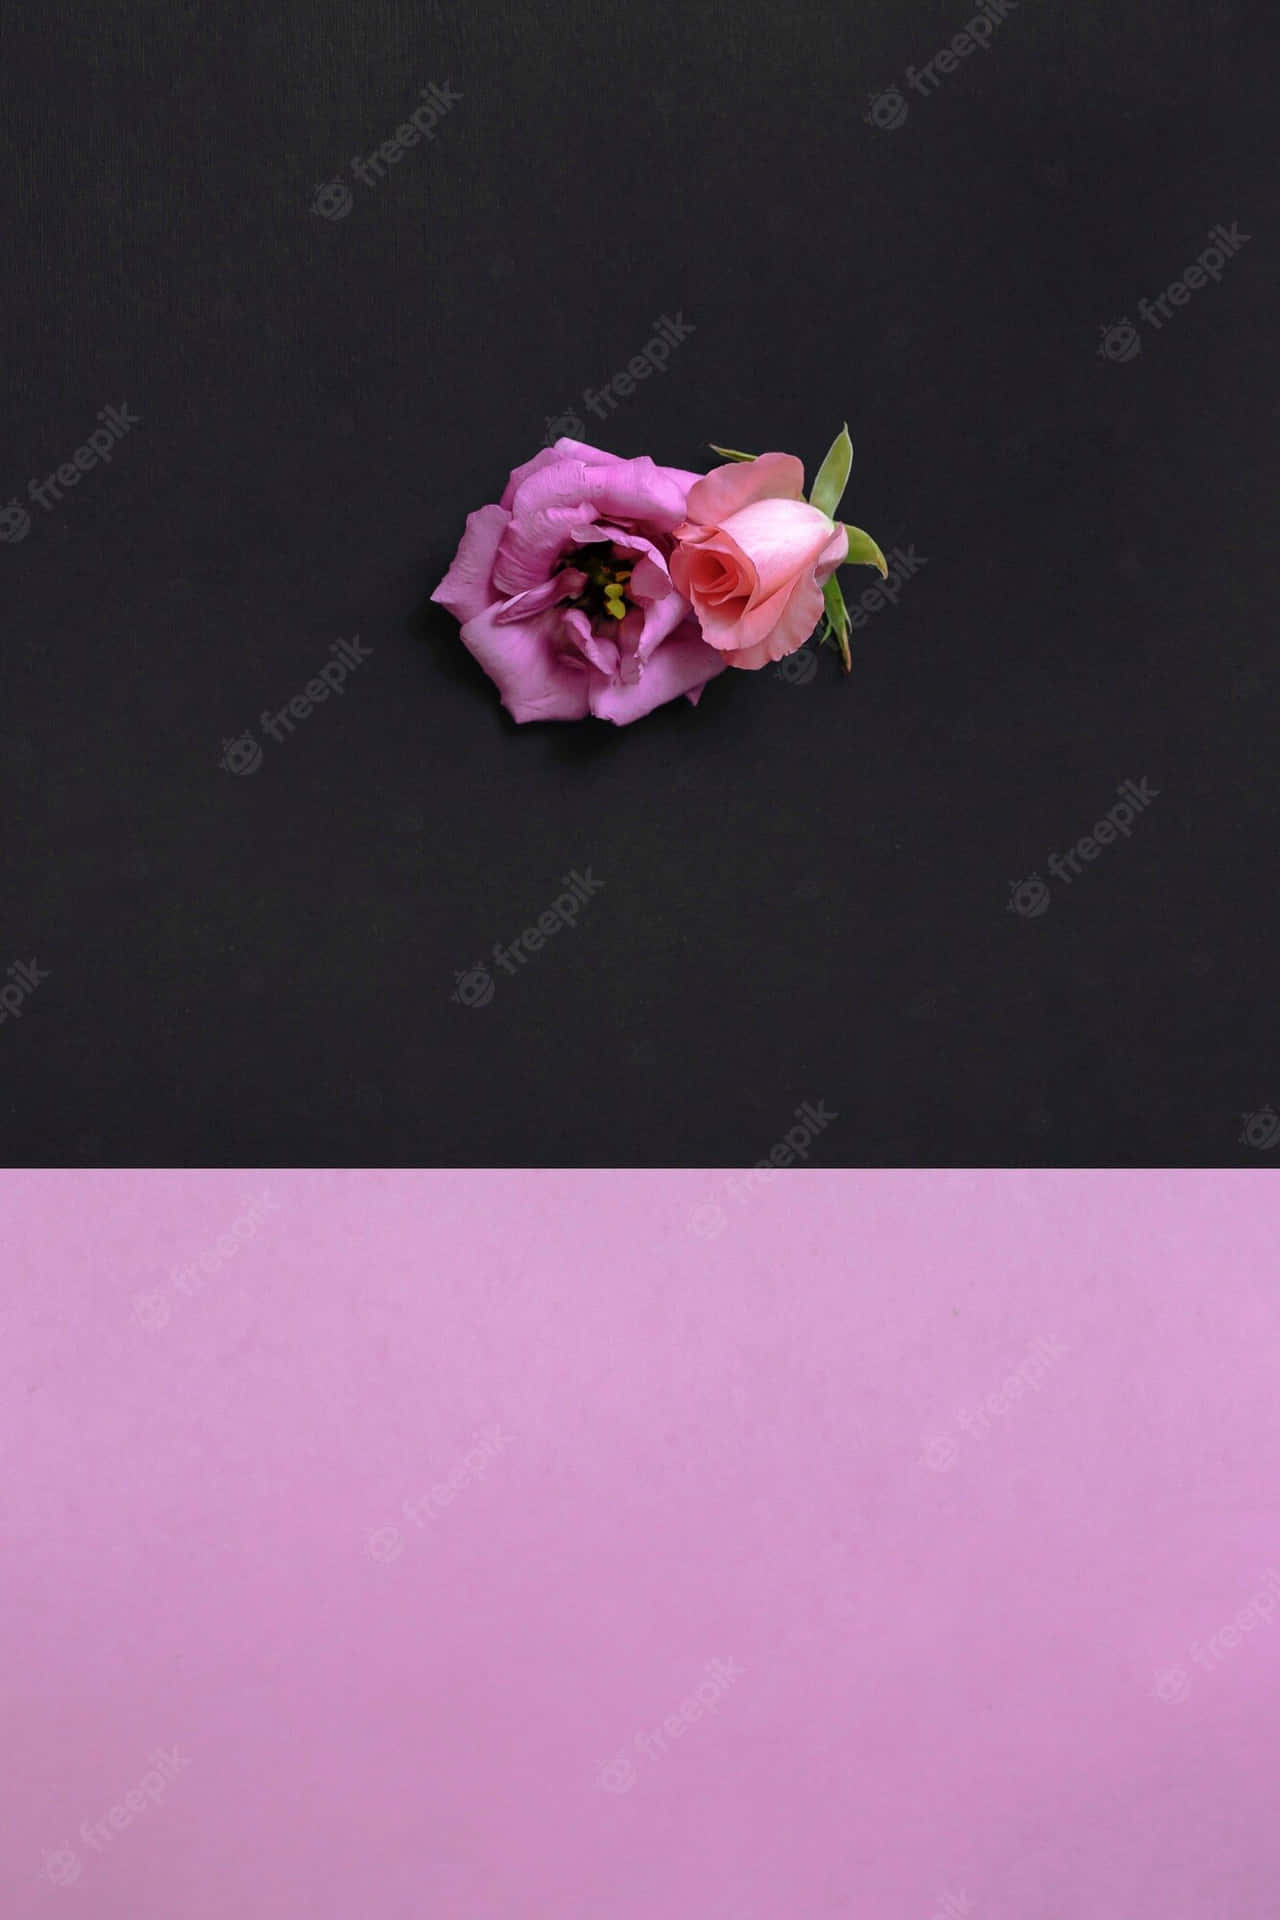 Two Pink Roses On A Black Background Wallpaper